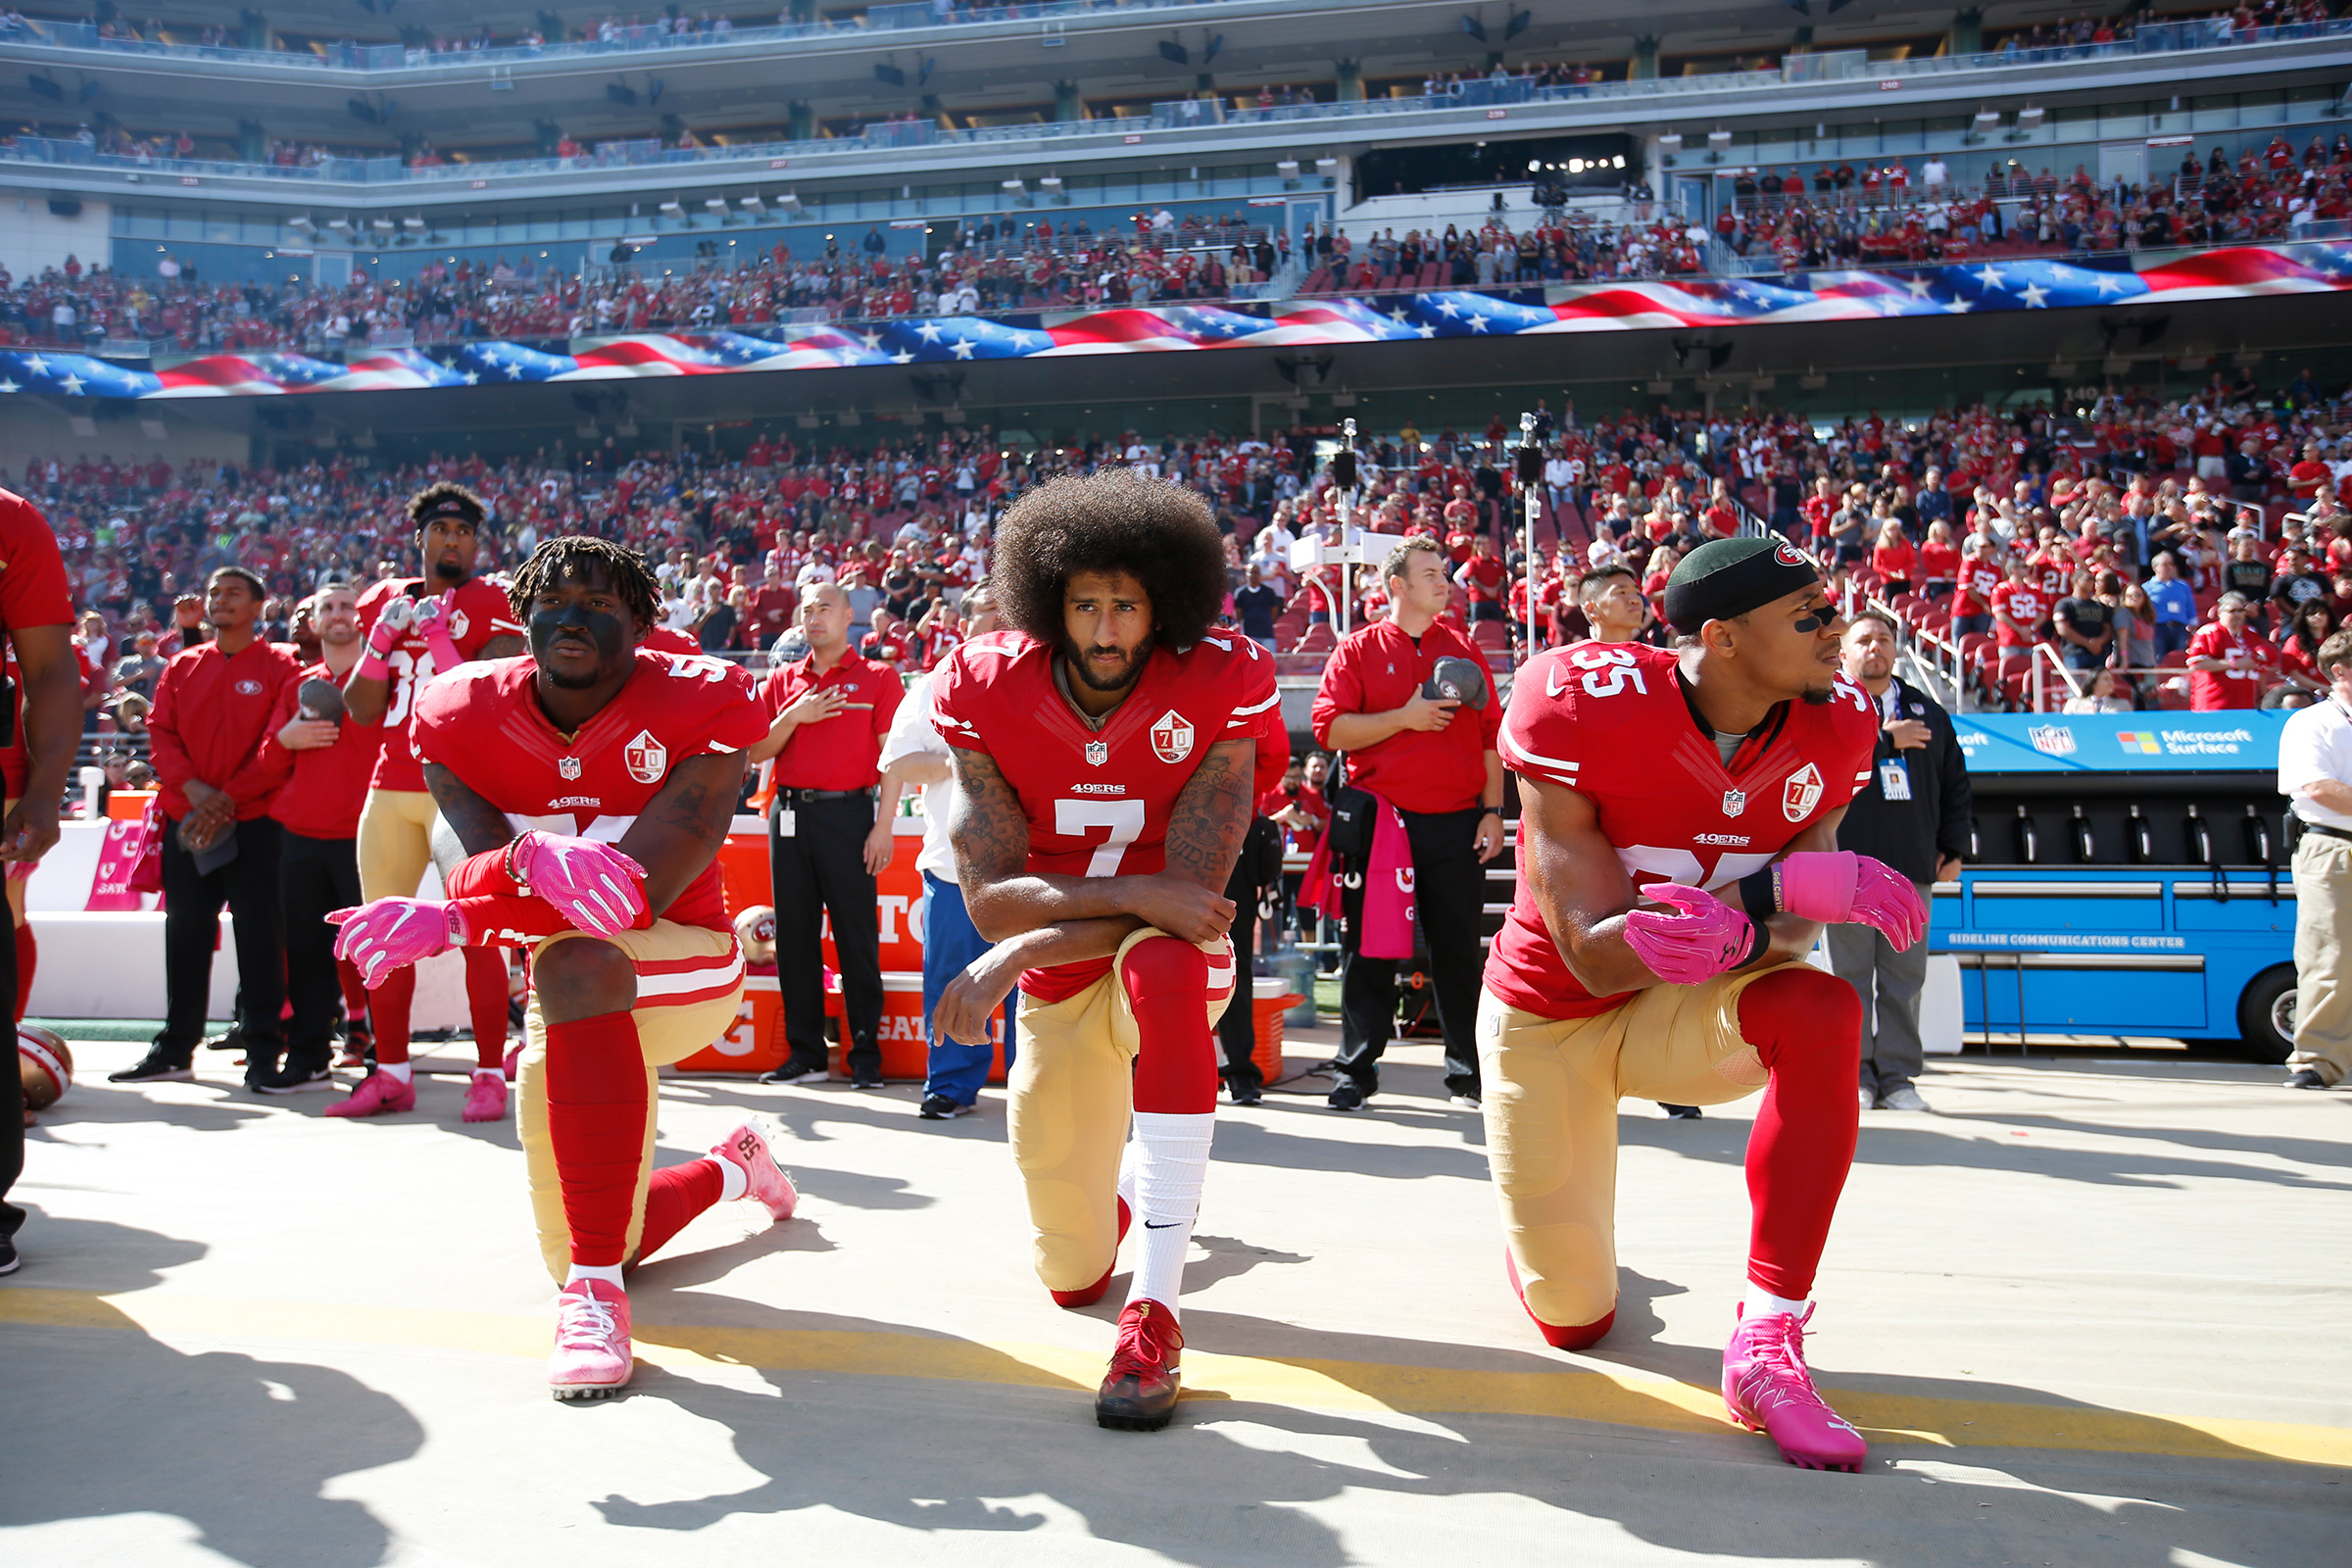 Colin Kaepernick, with teammates Eli Harold and Eric Reid of the San Francisco 49ers, kneel for the anthem prior to the game against the Tampa Bay Buccaneers at Levi Stadium in Santa Clara, Calif. on Oct. 23, 2016. (Michael Zagaris—San Francisco 49ers/Getty Images)